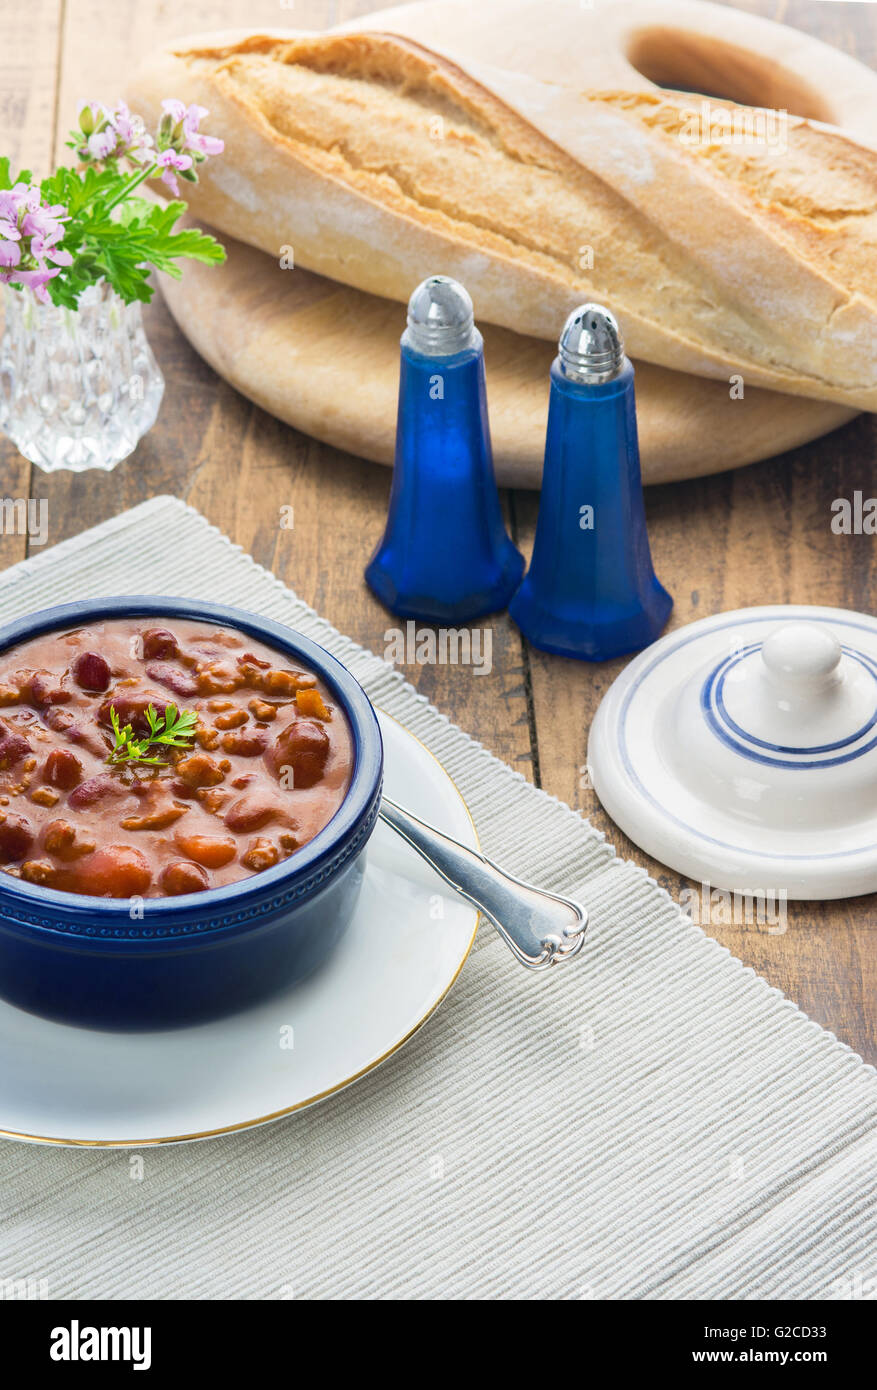 vertical image of a table setting showing a meal of chilli con cane on a wooden table set with bread in a bright window light. Stock Photo